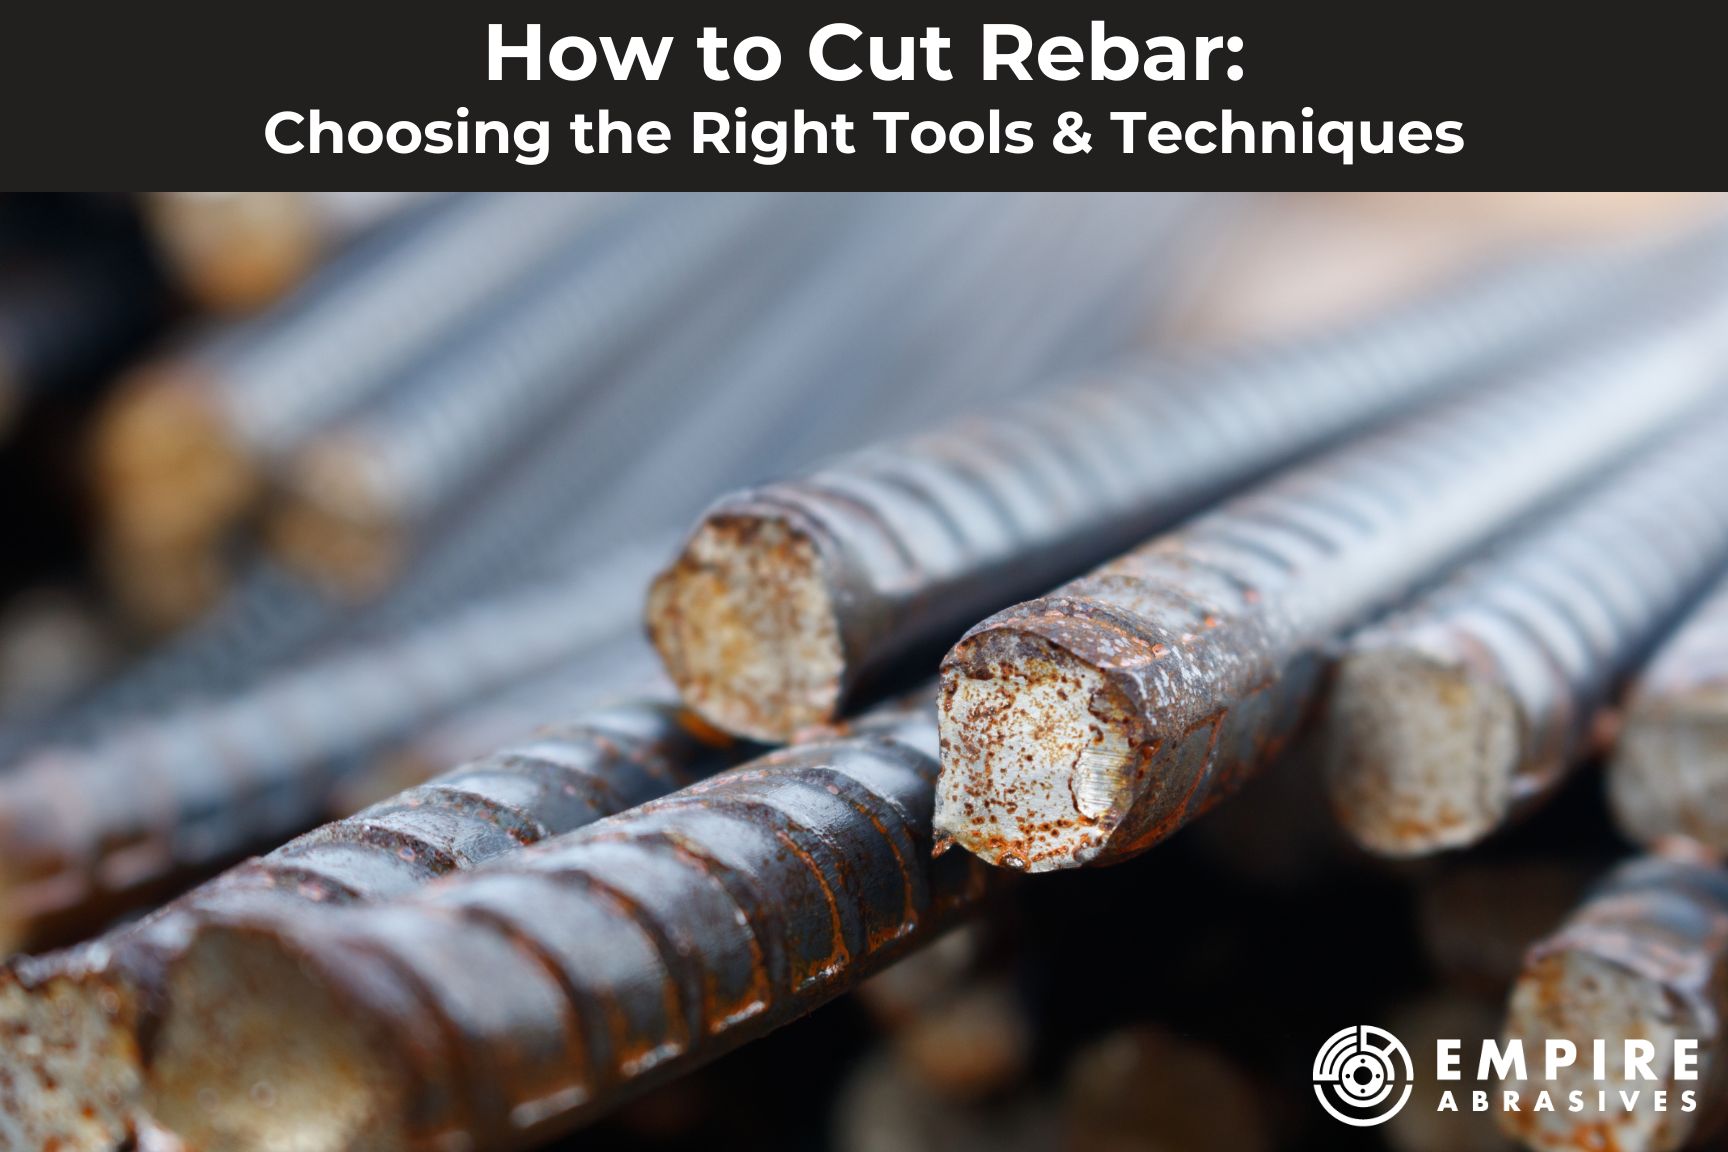 Empire Abrasives: Tools and Techniques to Cut Rebar